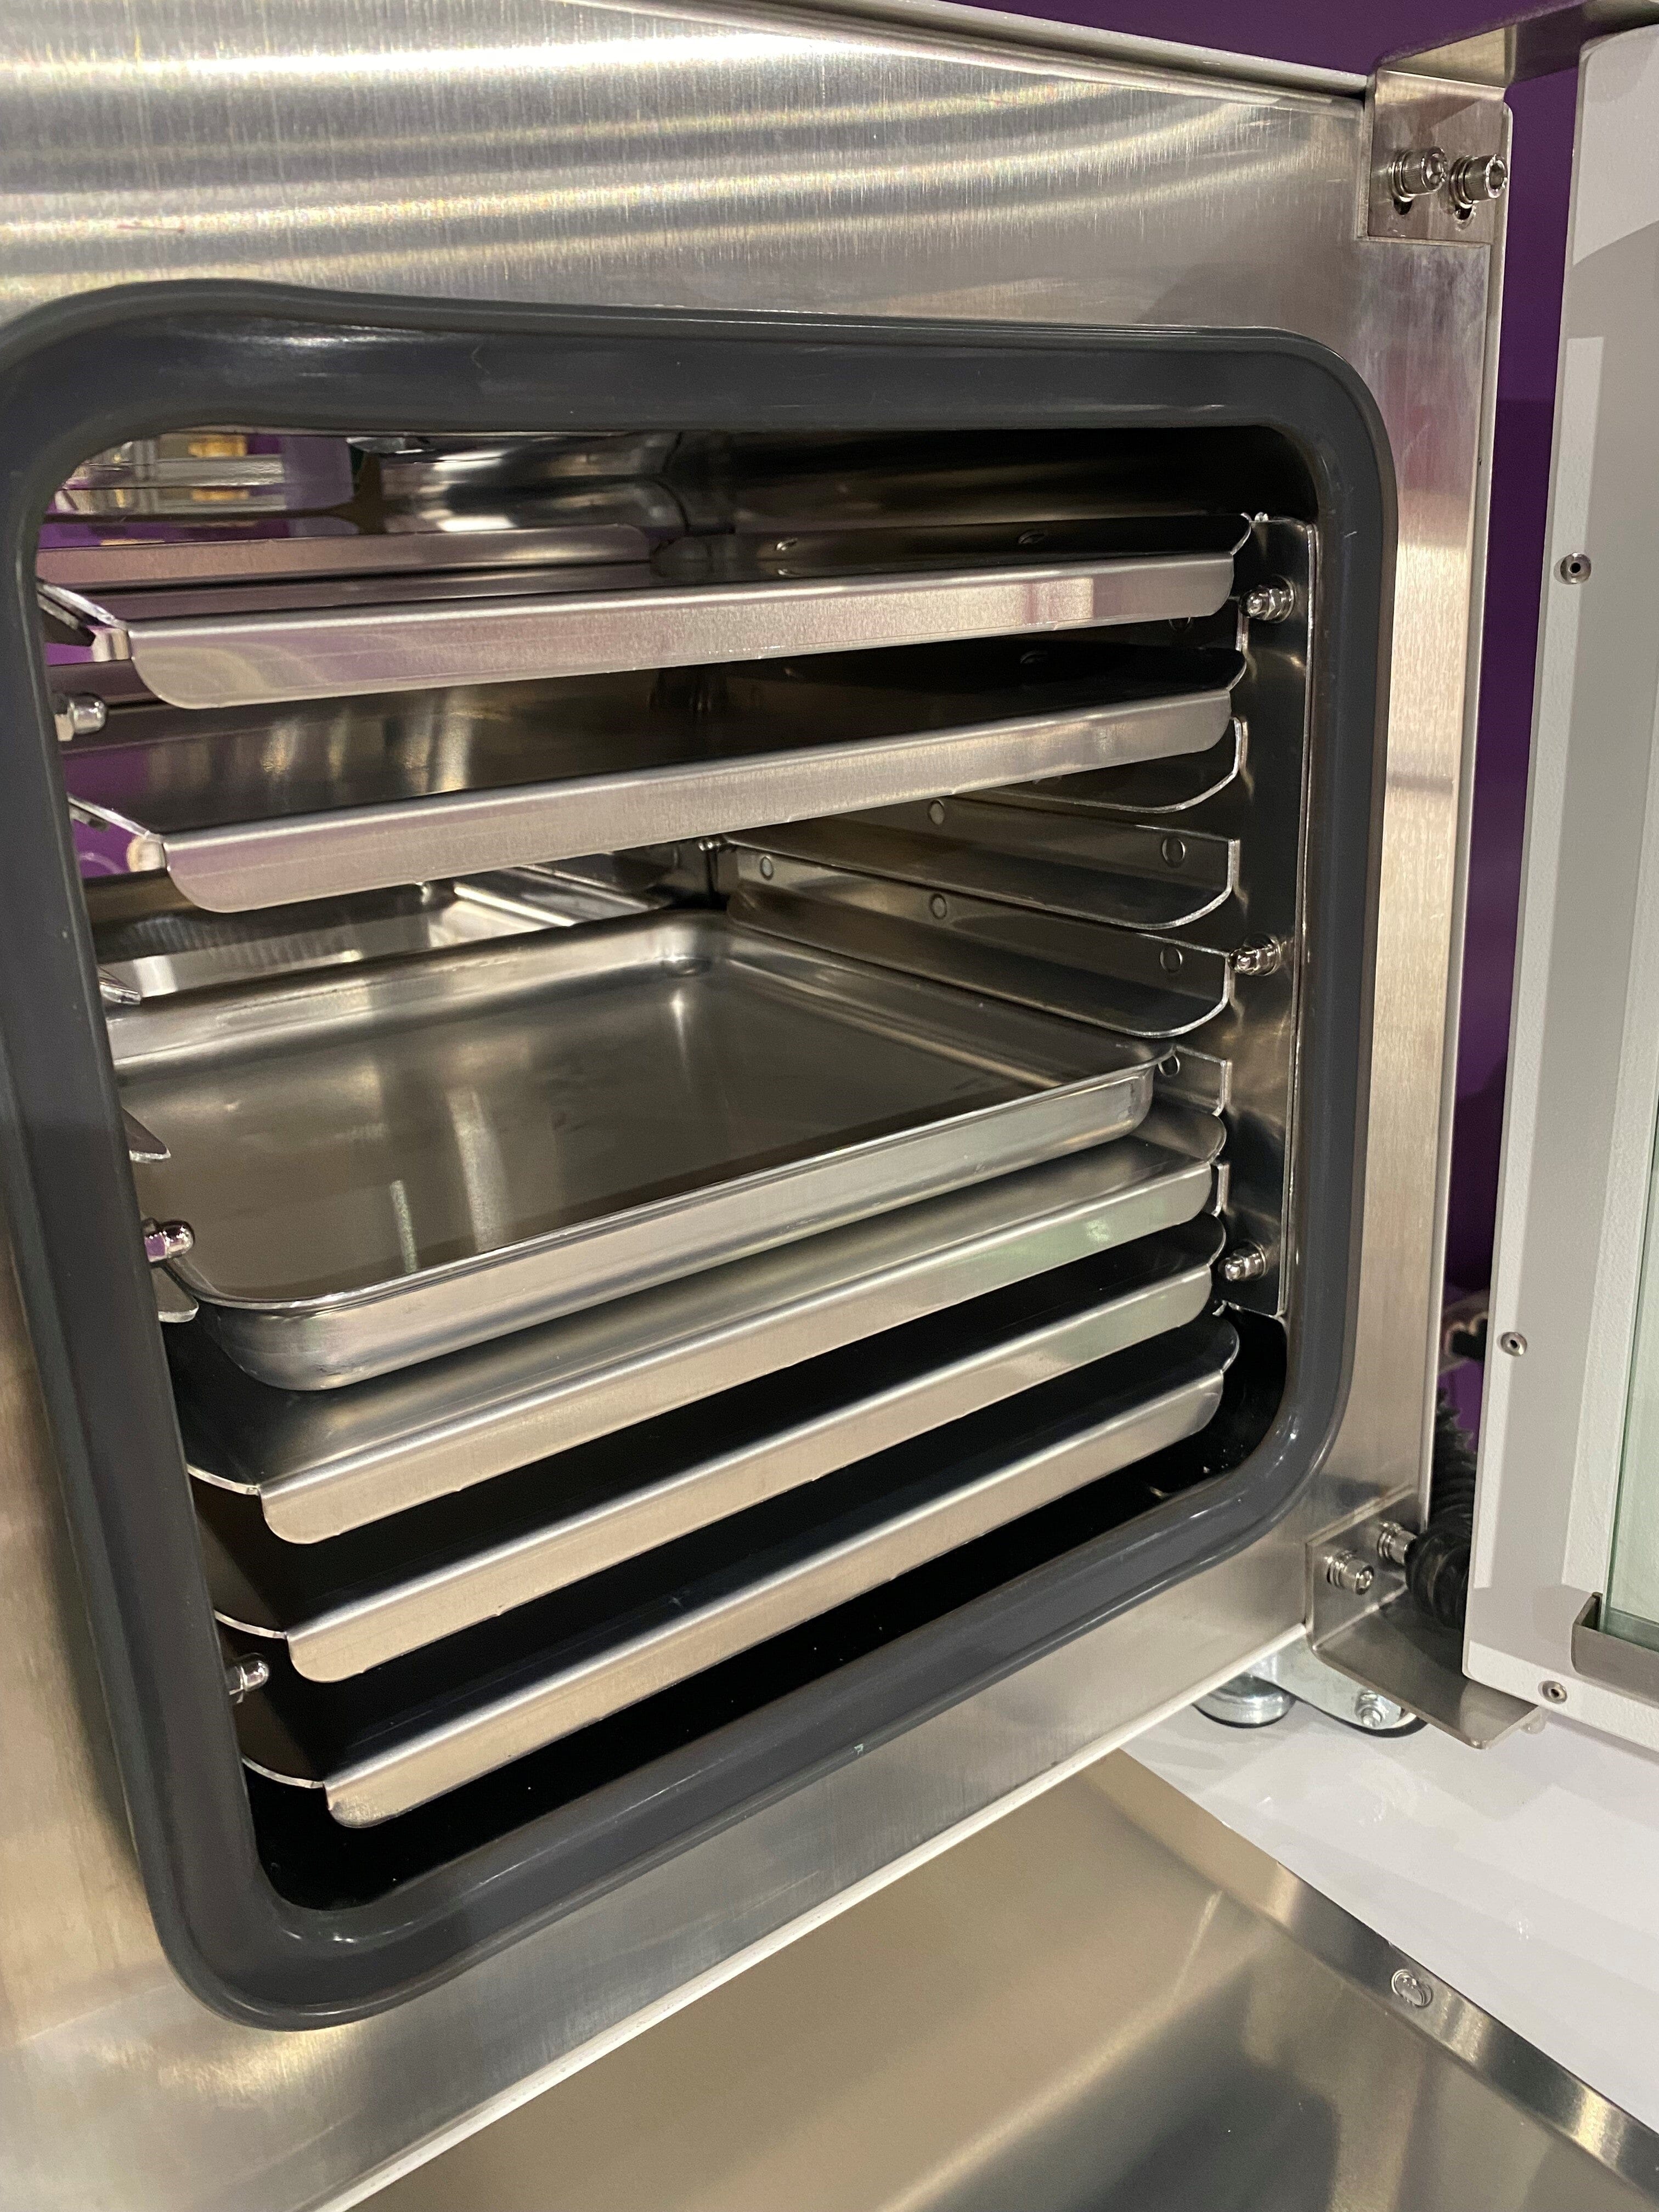 10x10 Toaster Oven Pan